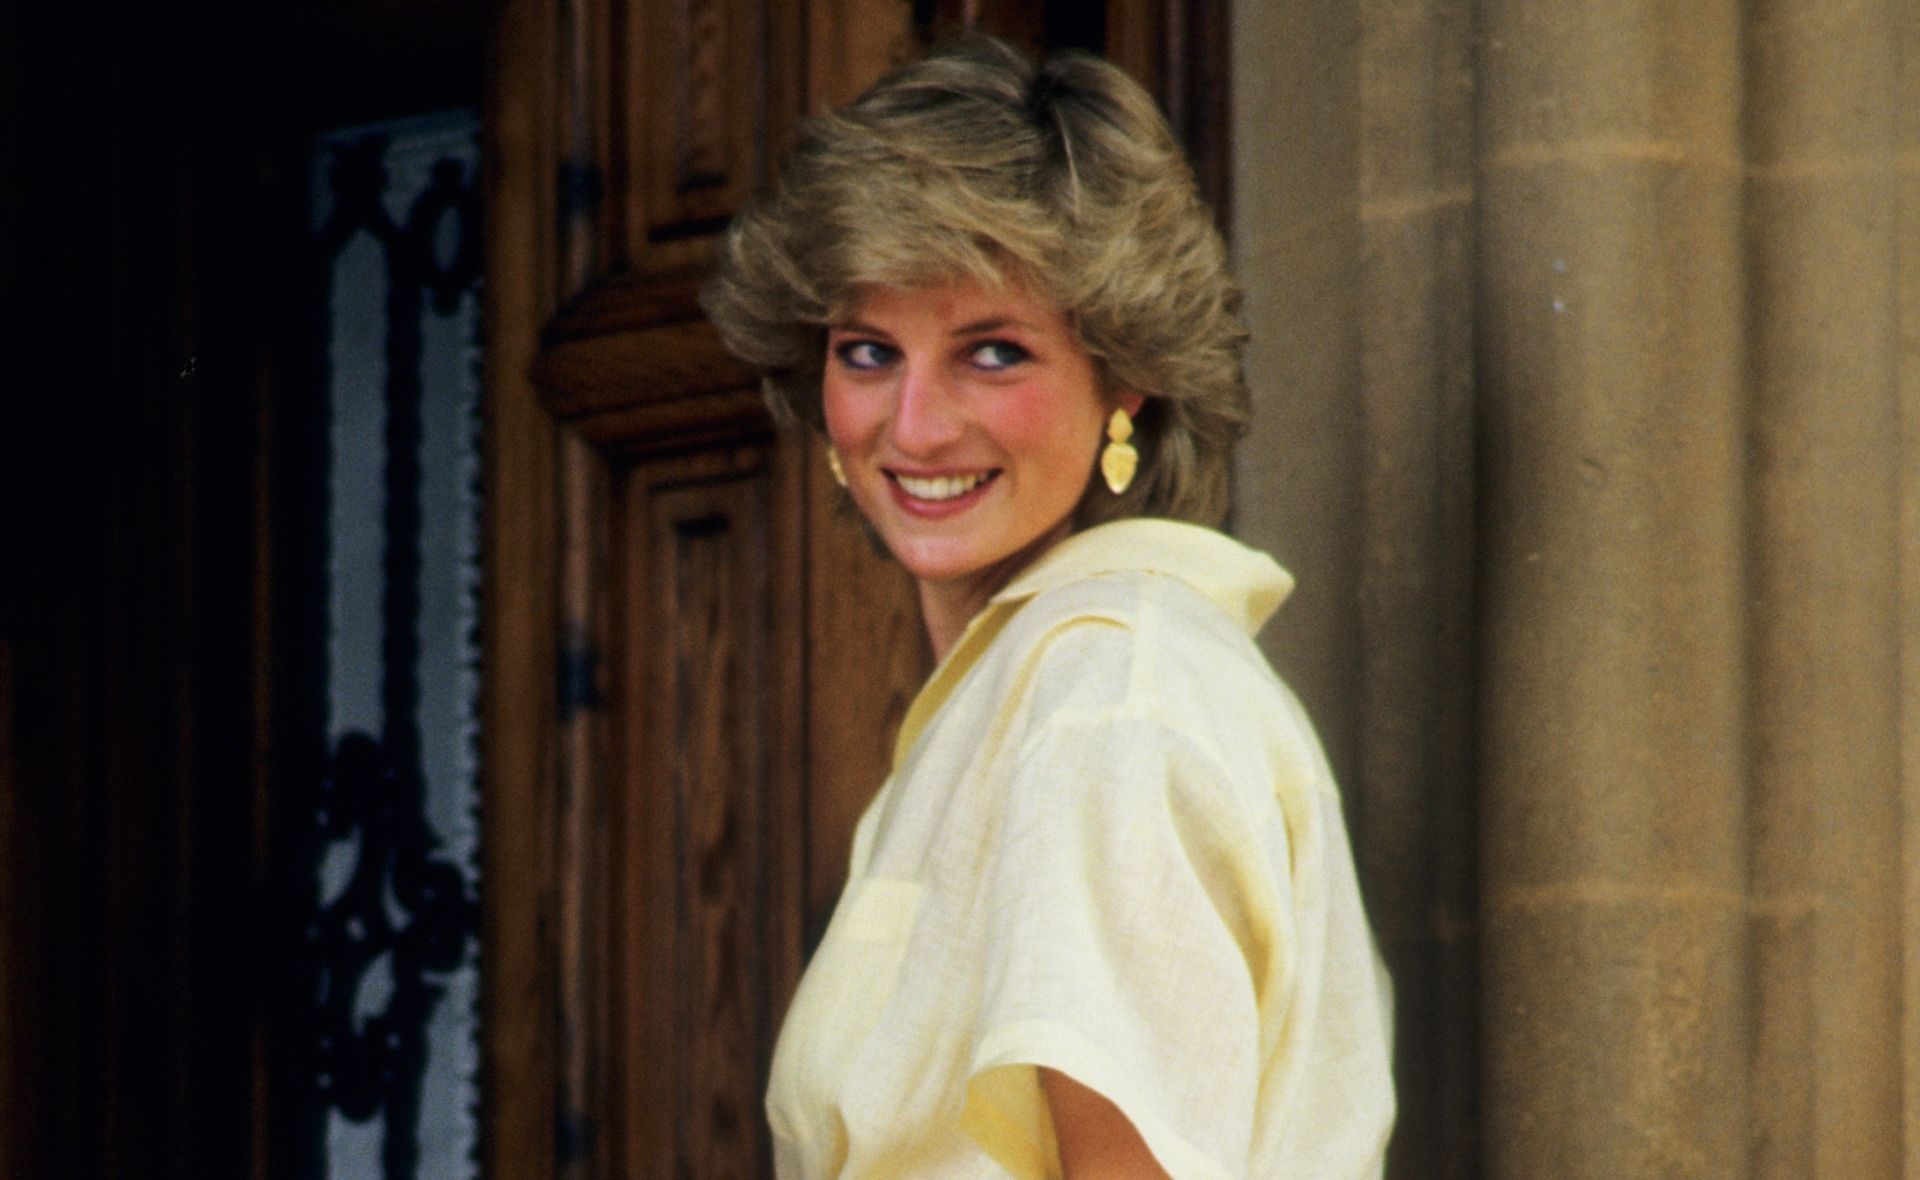 Kensington Palace debuts a never-before-seen portrait of Princess Diana from the 80s and it’s simply breathtaking